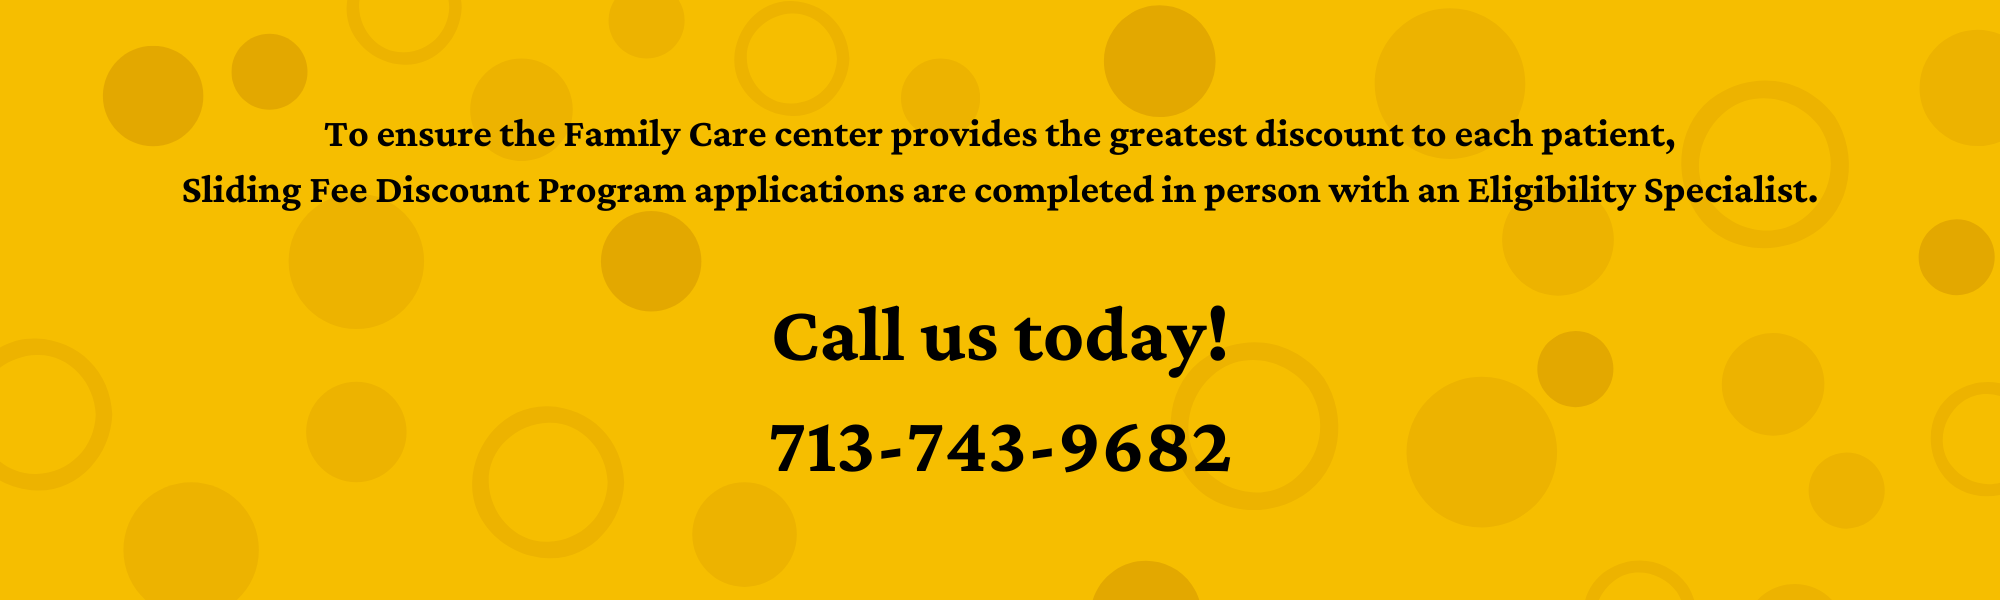 To ensure the Family Care center provides the greatest discount to each patient, Sliding Fee Discount Program applications are completed in person with an Eligibility Specialist. Call us today! 713-743-9682